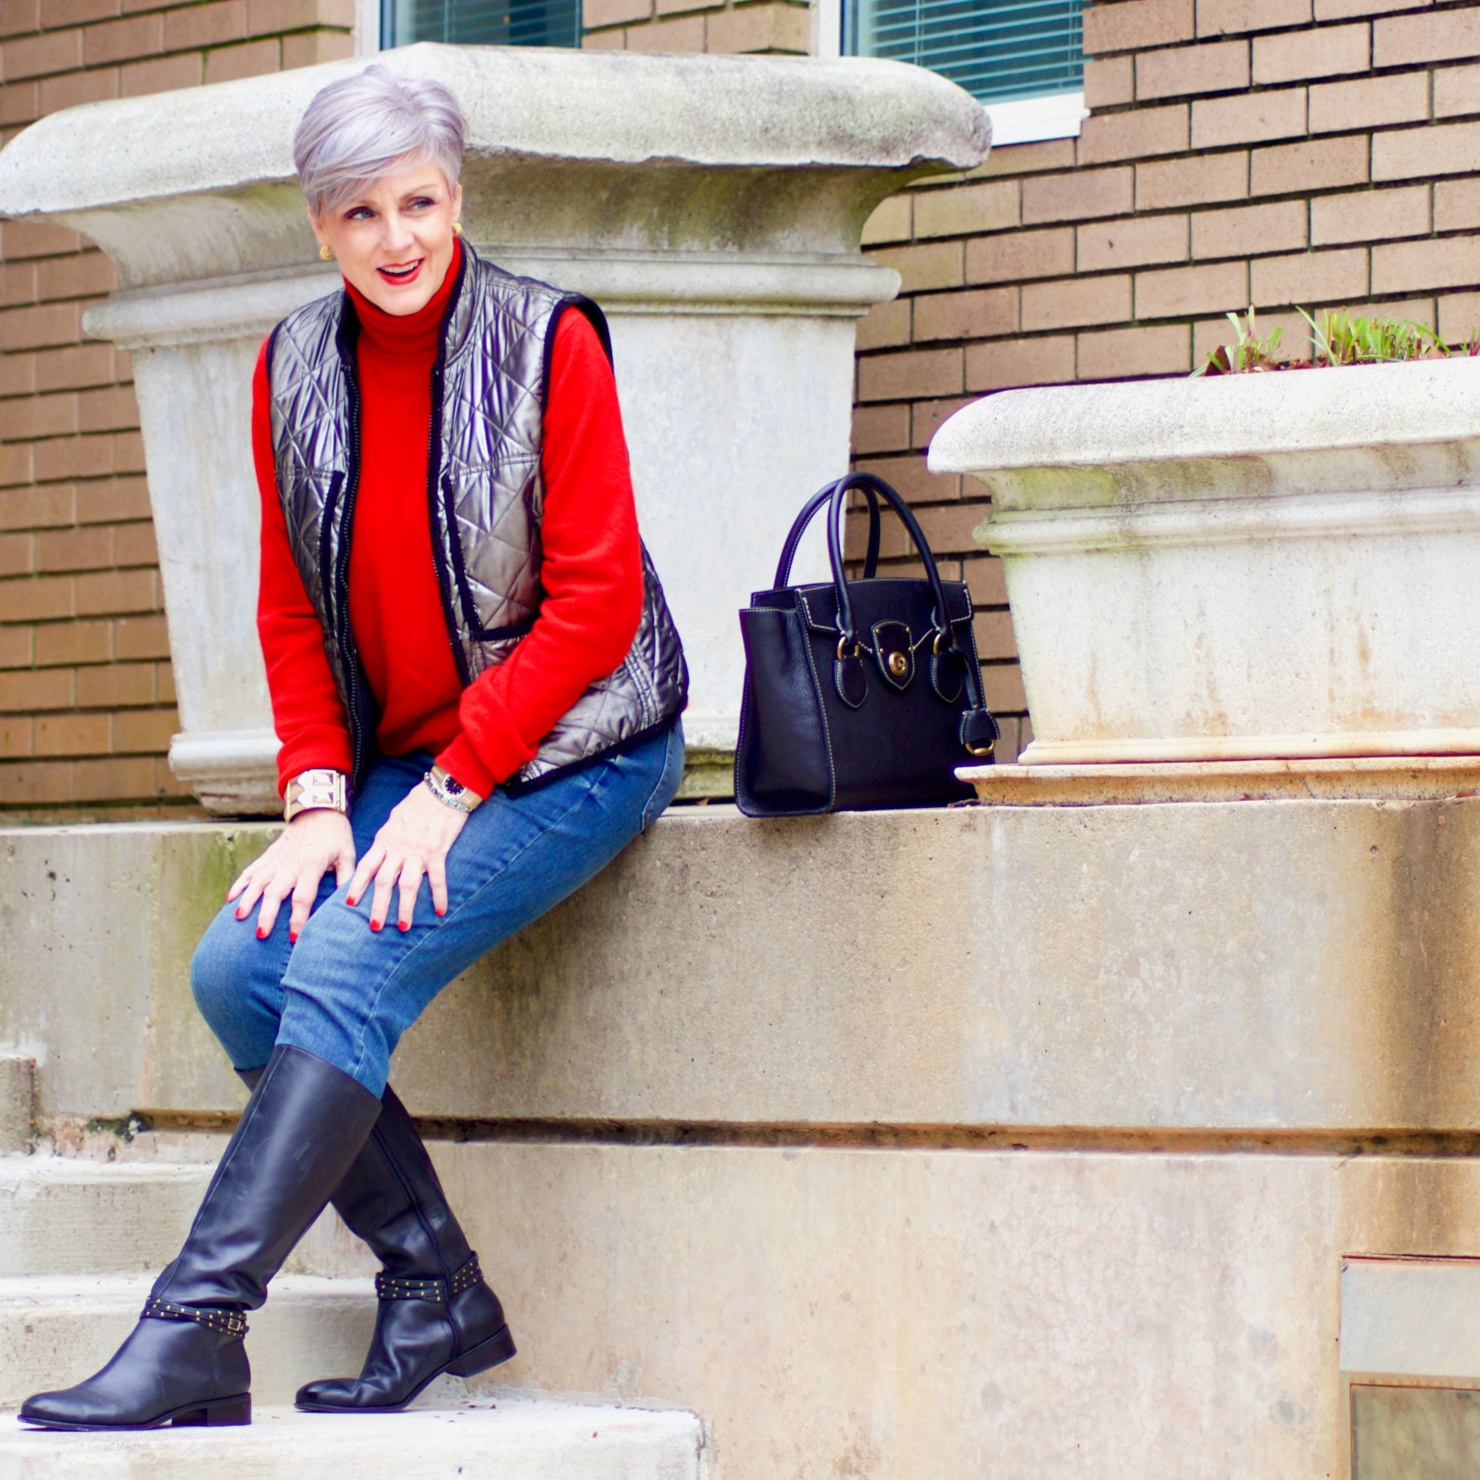 beth from Style at a Certain Age wears five classic winter essentials